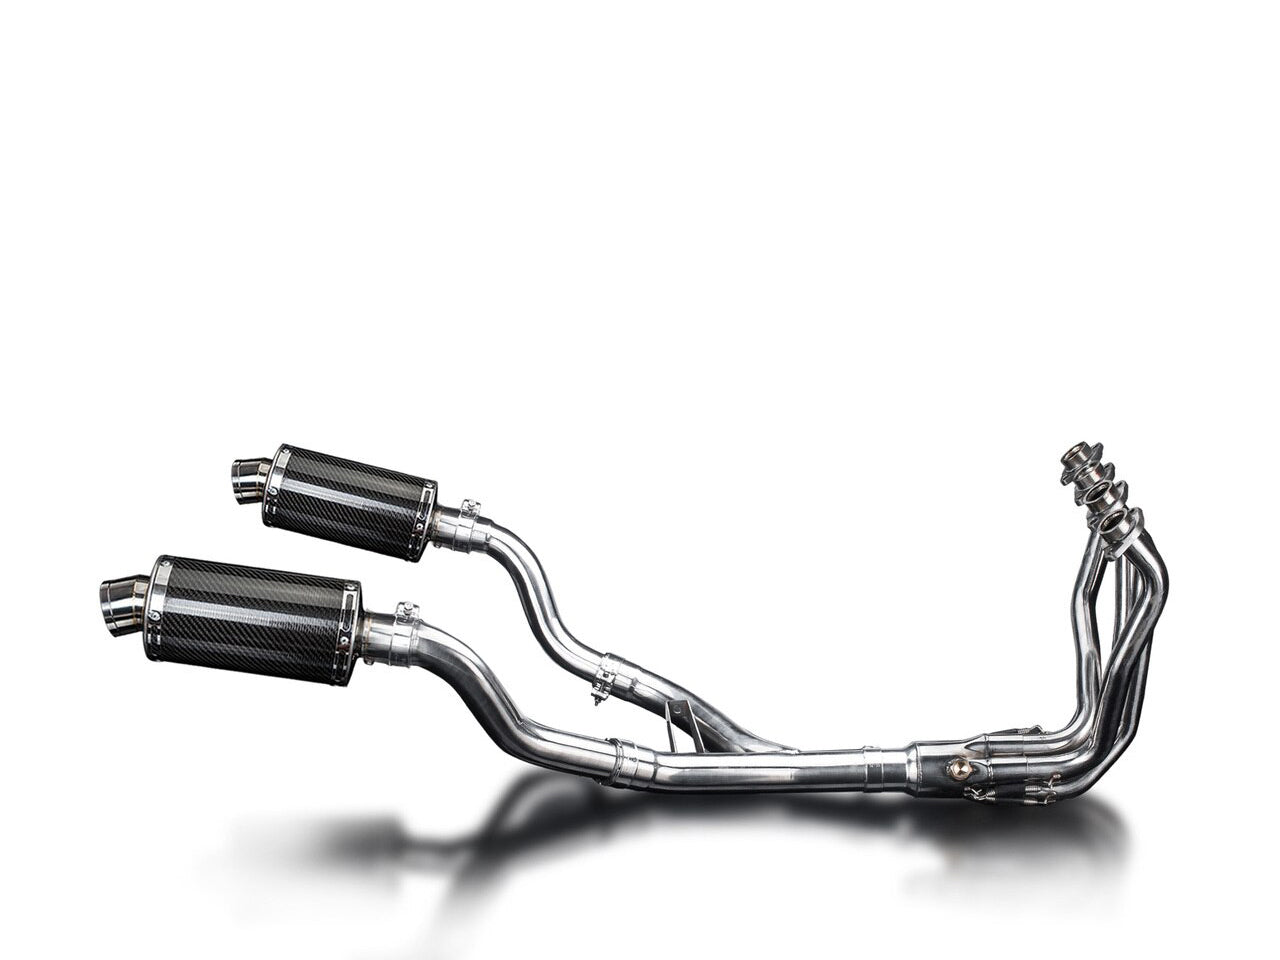 DELKEVIC Kawasaki Ninja 1000 / Z1000 Full Exhaust System with DS70 9" Carbon Silencers